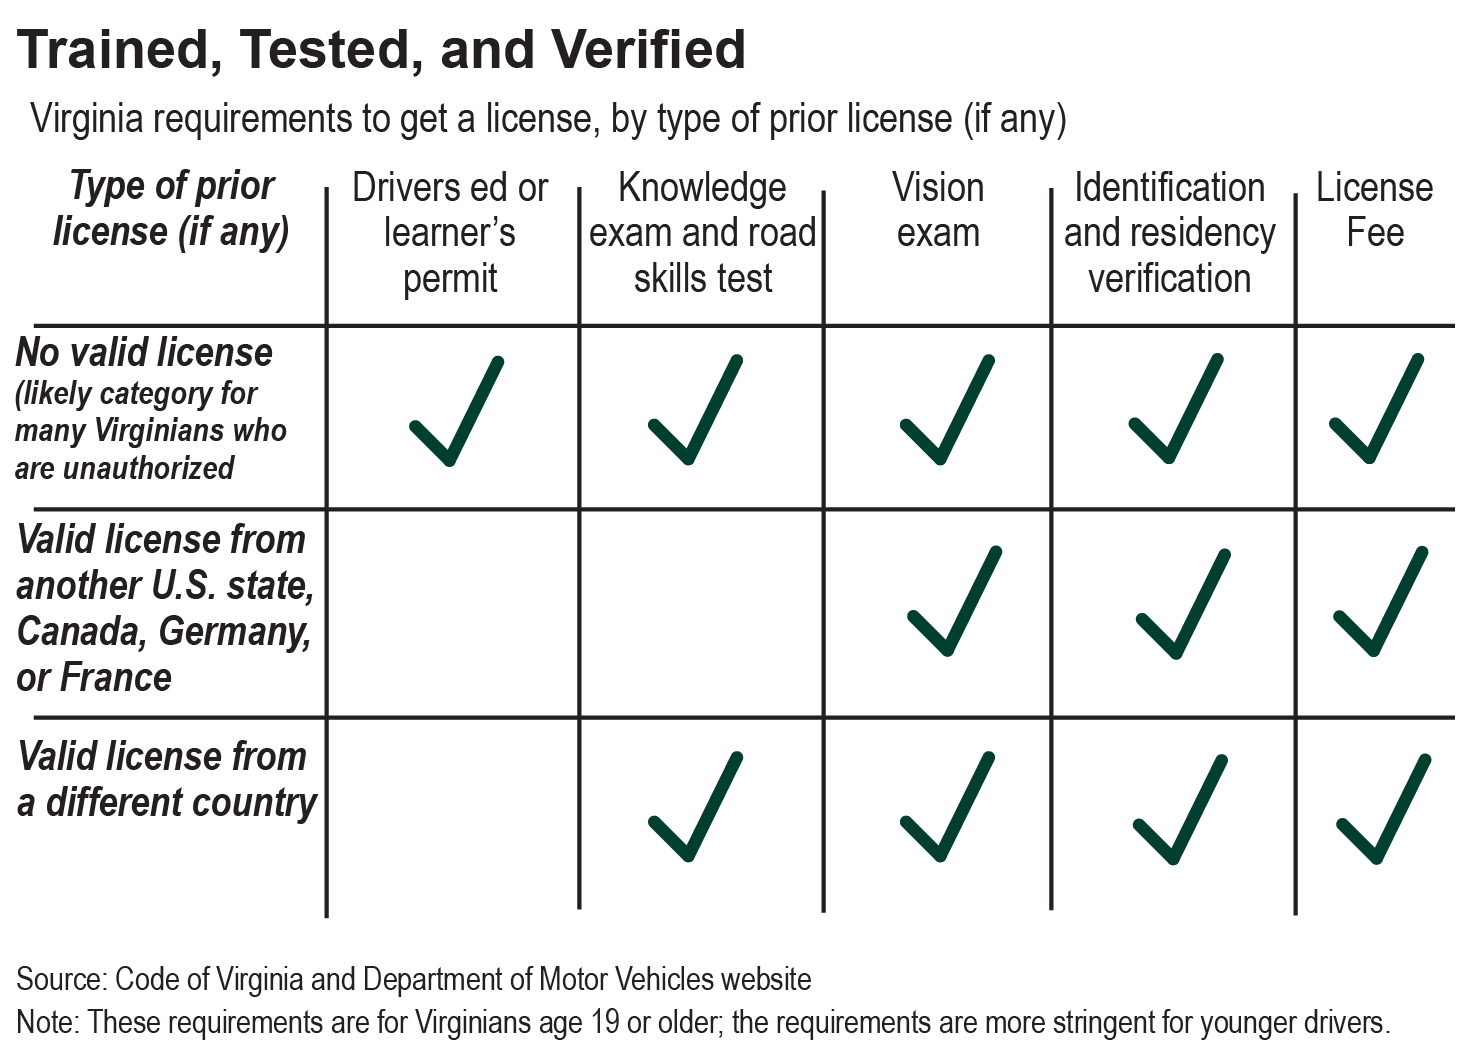 Chart showing the training, tests, and fees required to get a Virginia license, by type of prior license, if any